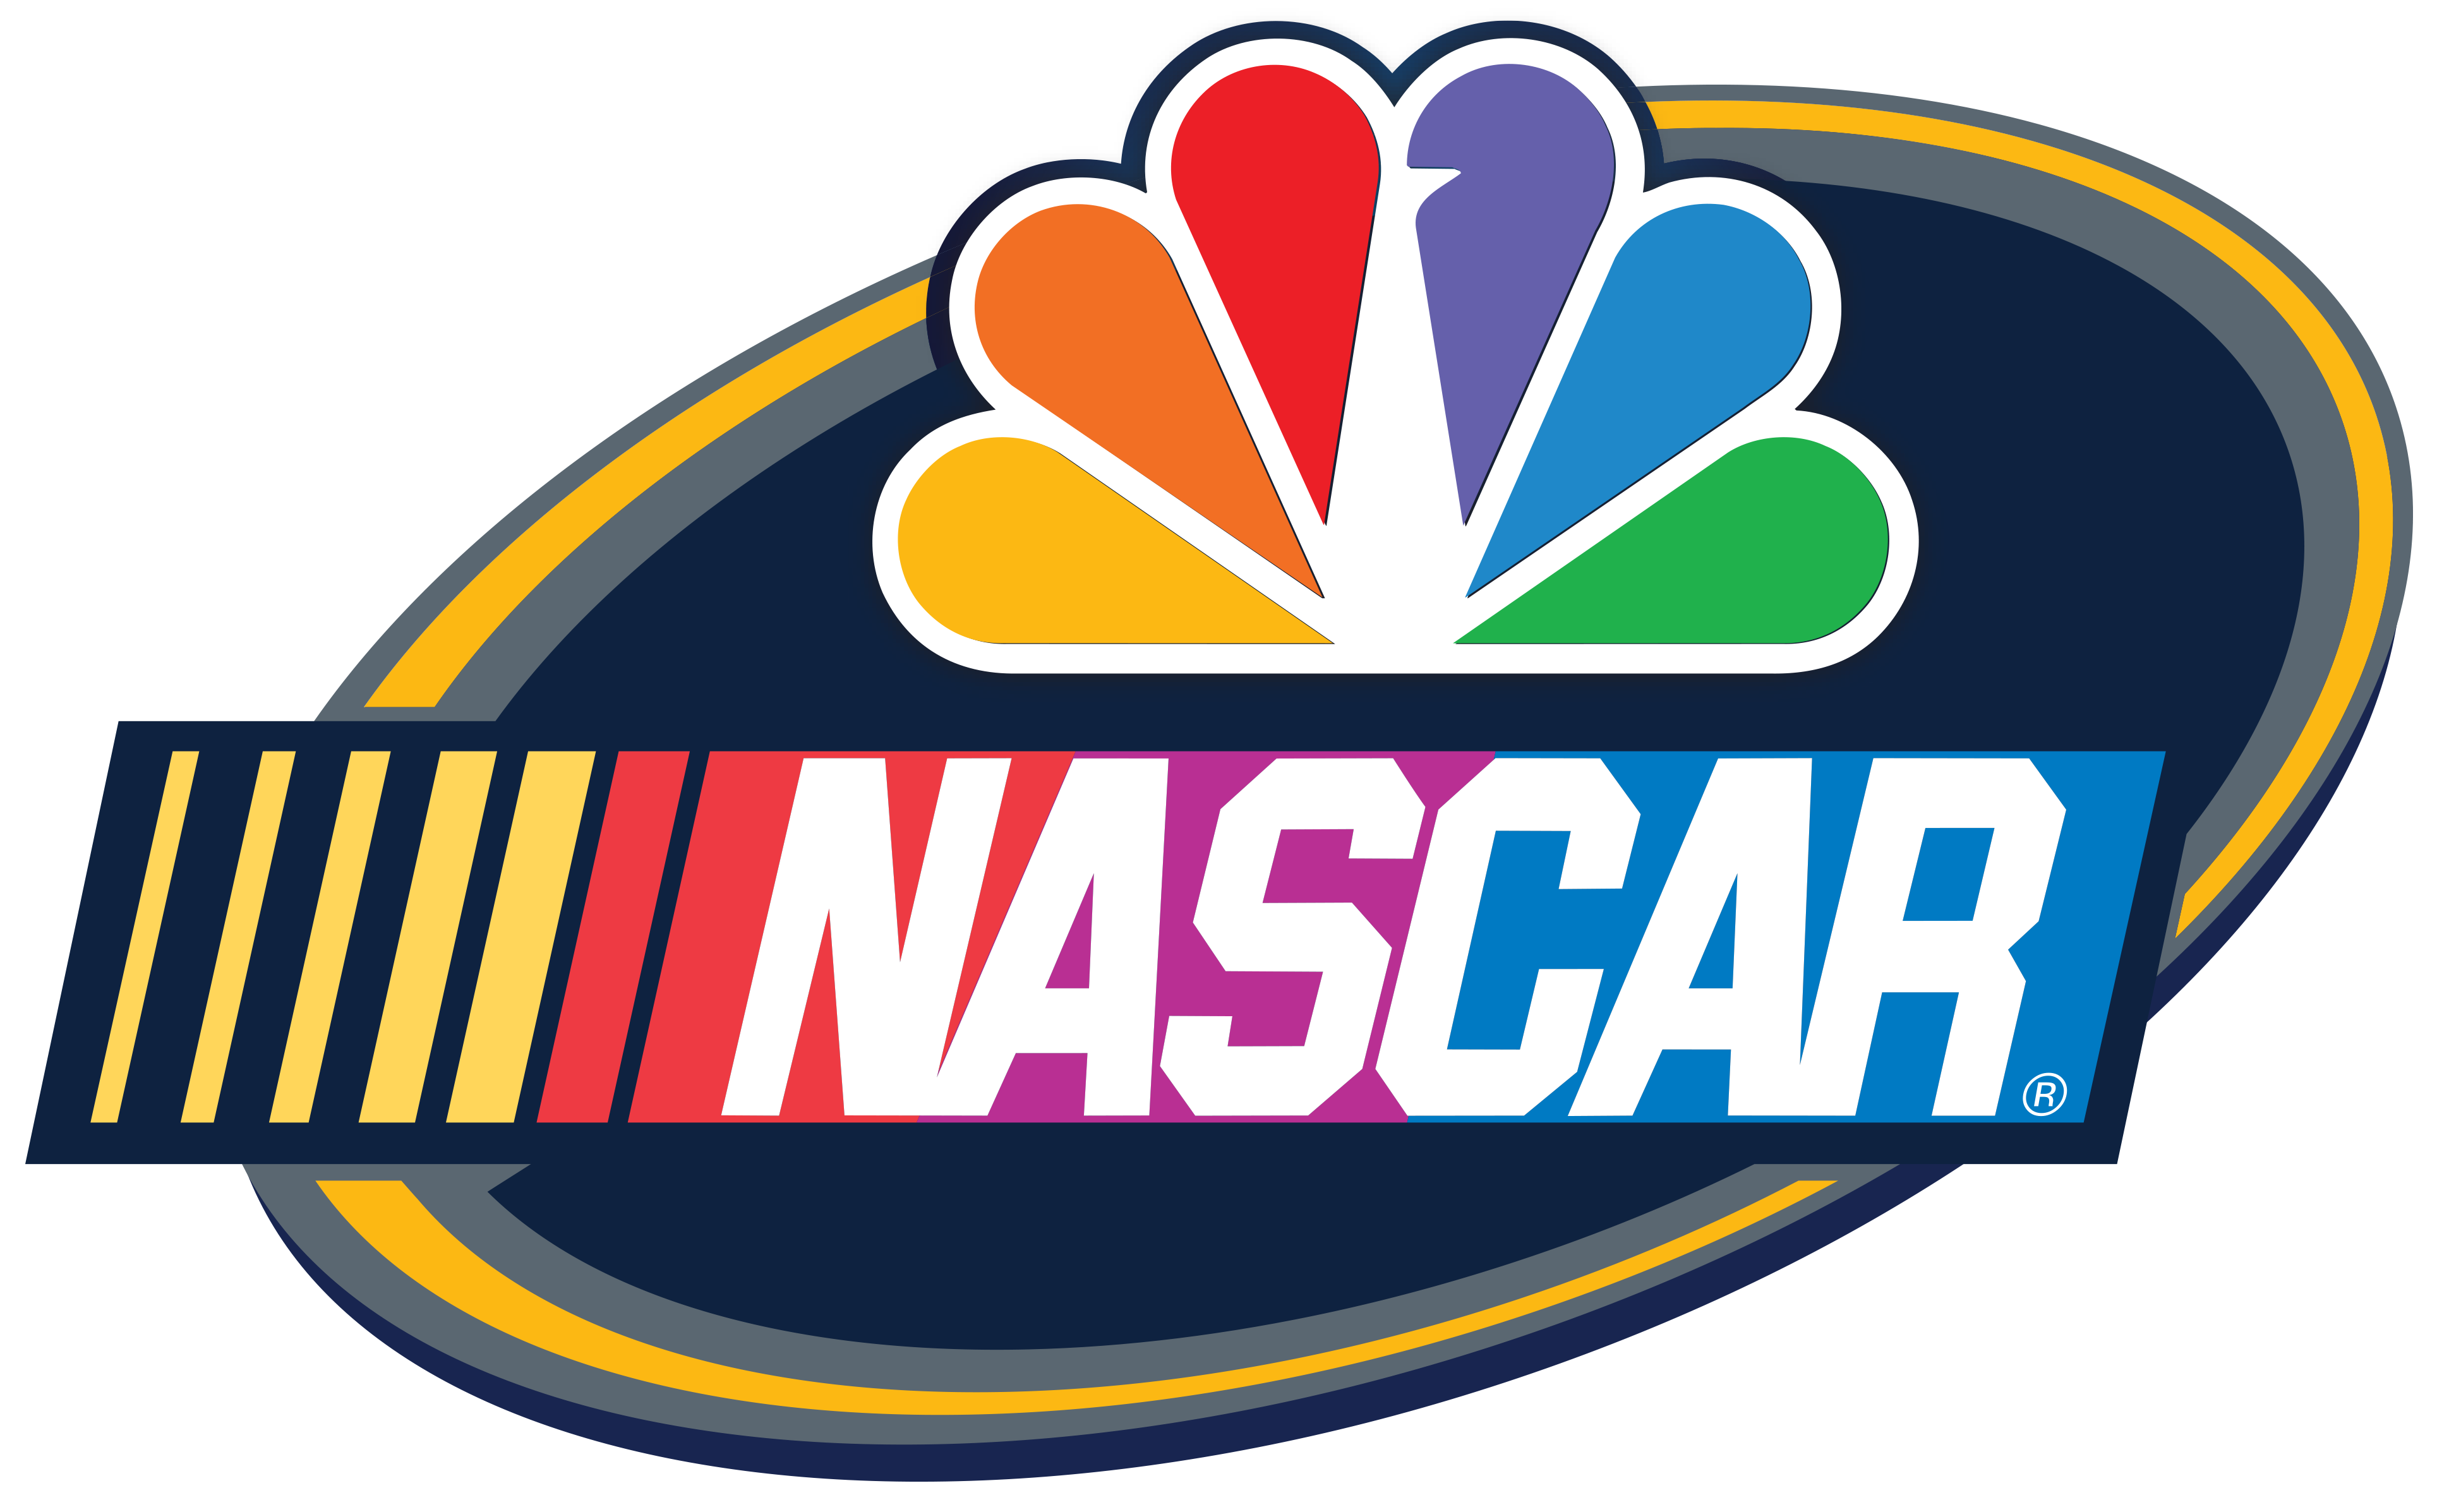 NBC SPORTS PRESENTS LIVE NASCAR CUP SERIES RACING FROM NEW HAMPSHIRE SUNDAY AT 3 P.M